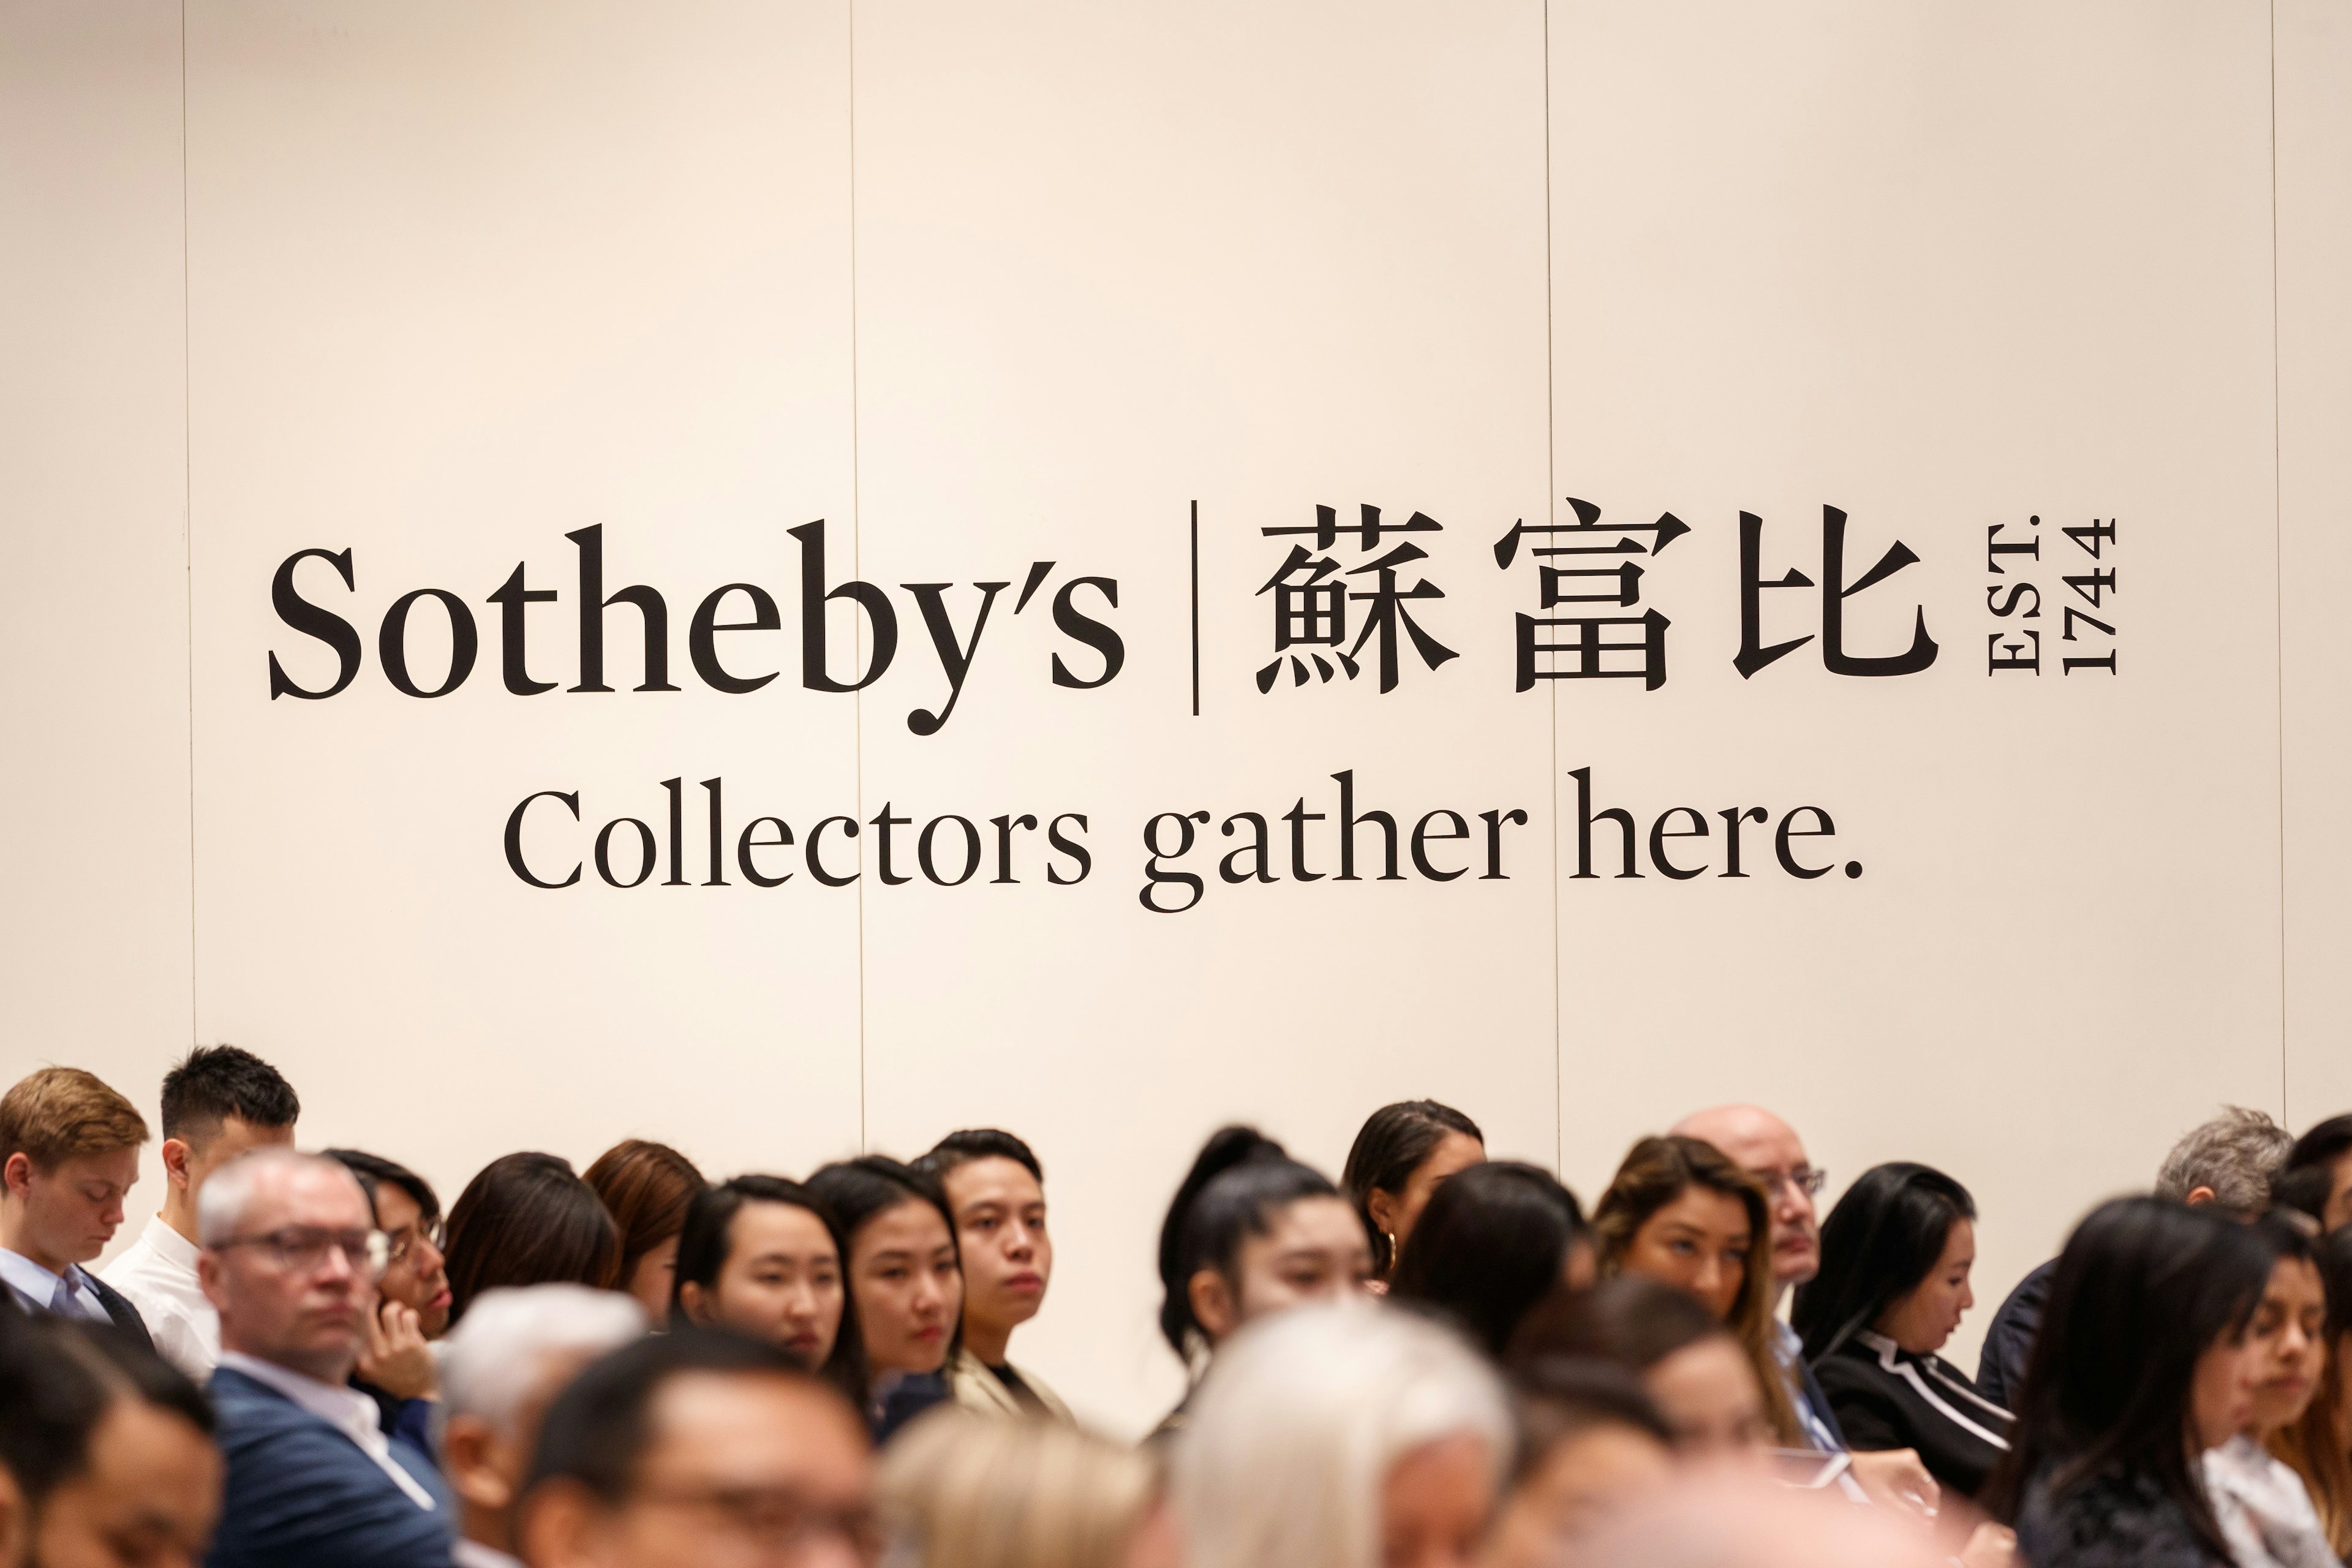 Sotheby’s foray into luxury business has only just begun to unfold. Photo: Sotheby's